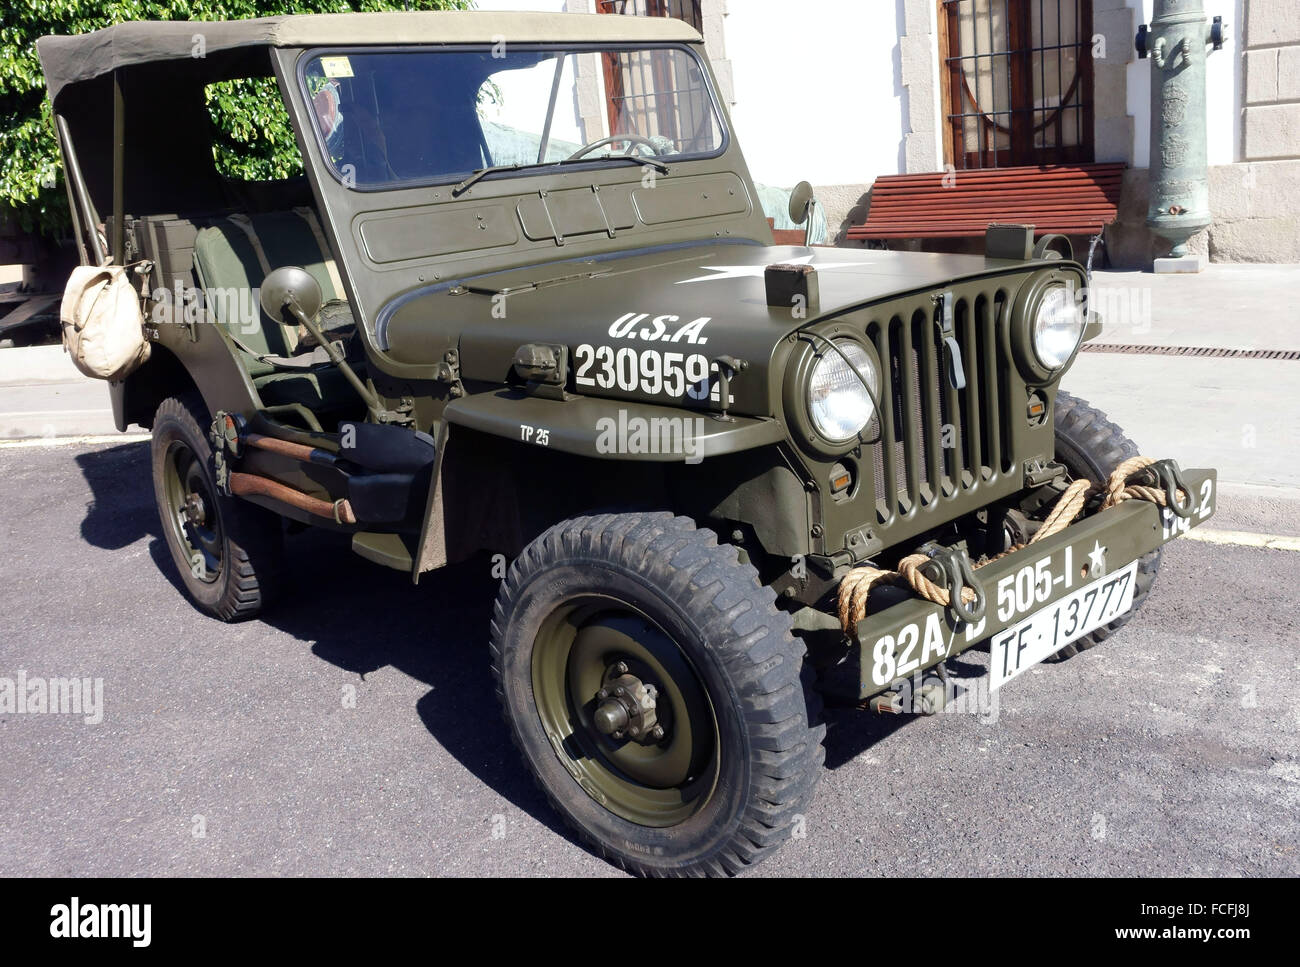 WWII era U.S. Army Jeep outside military museum in Tenerife, Spain Stock Photo